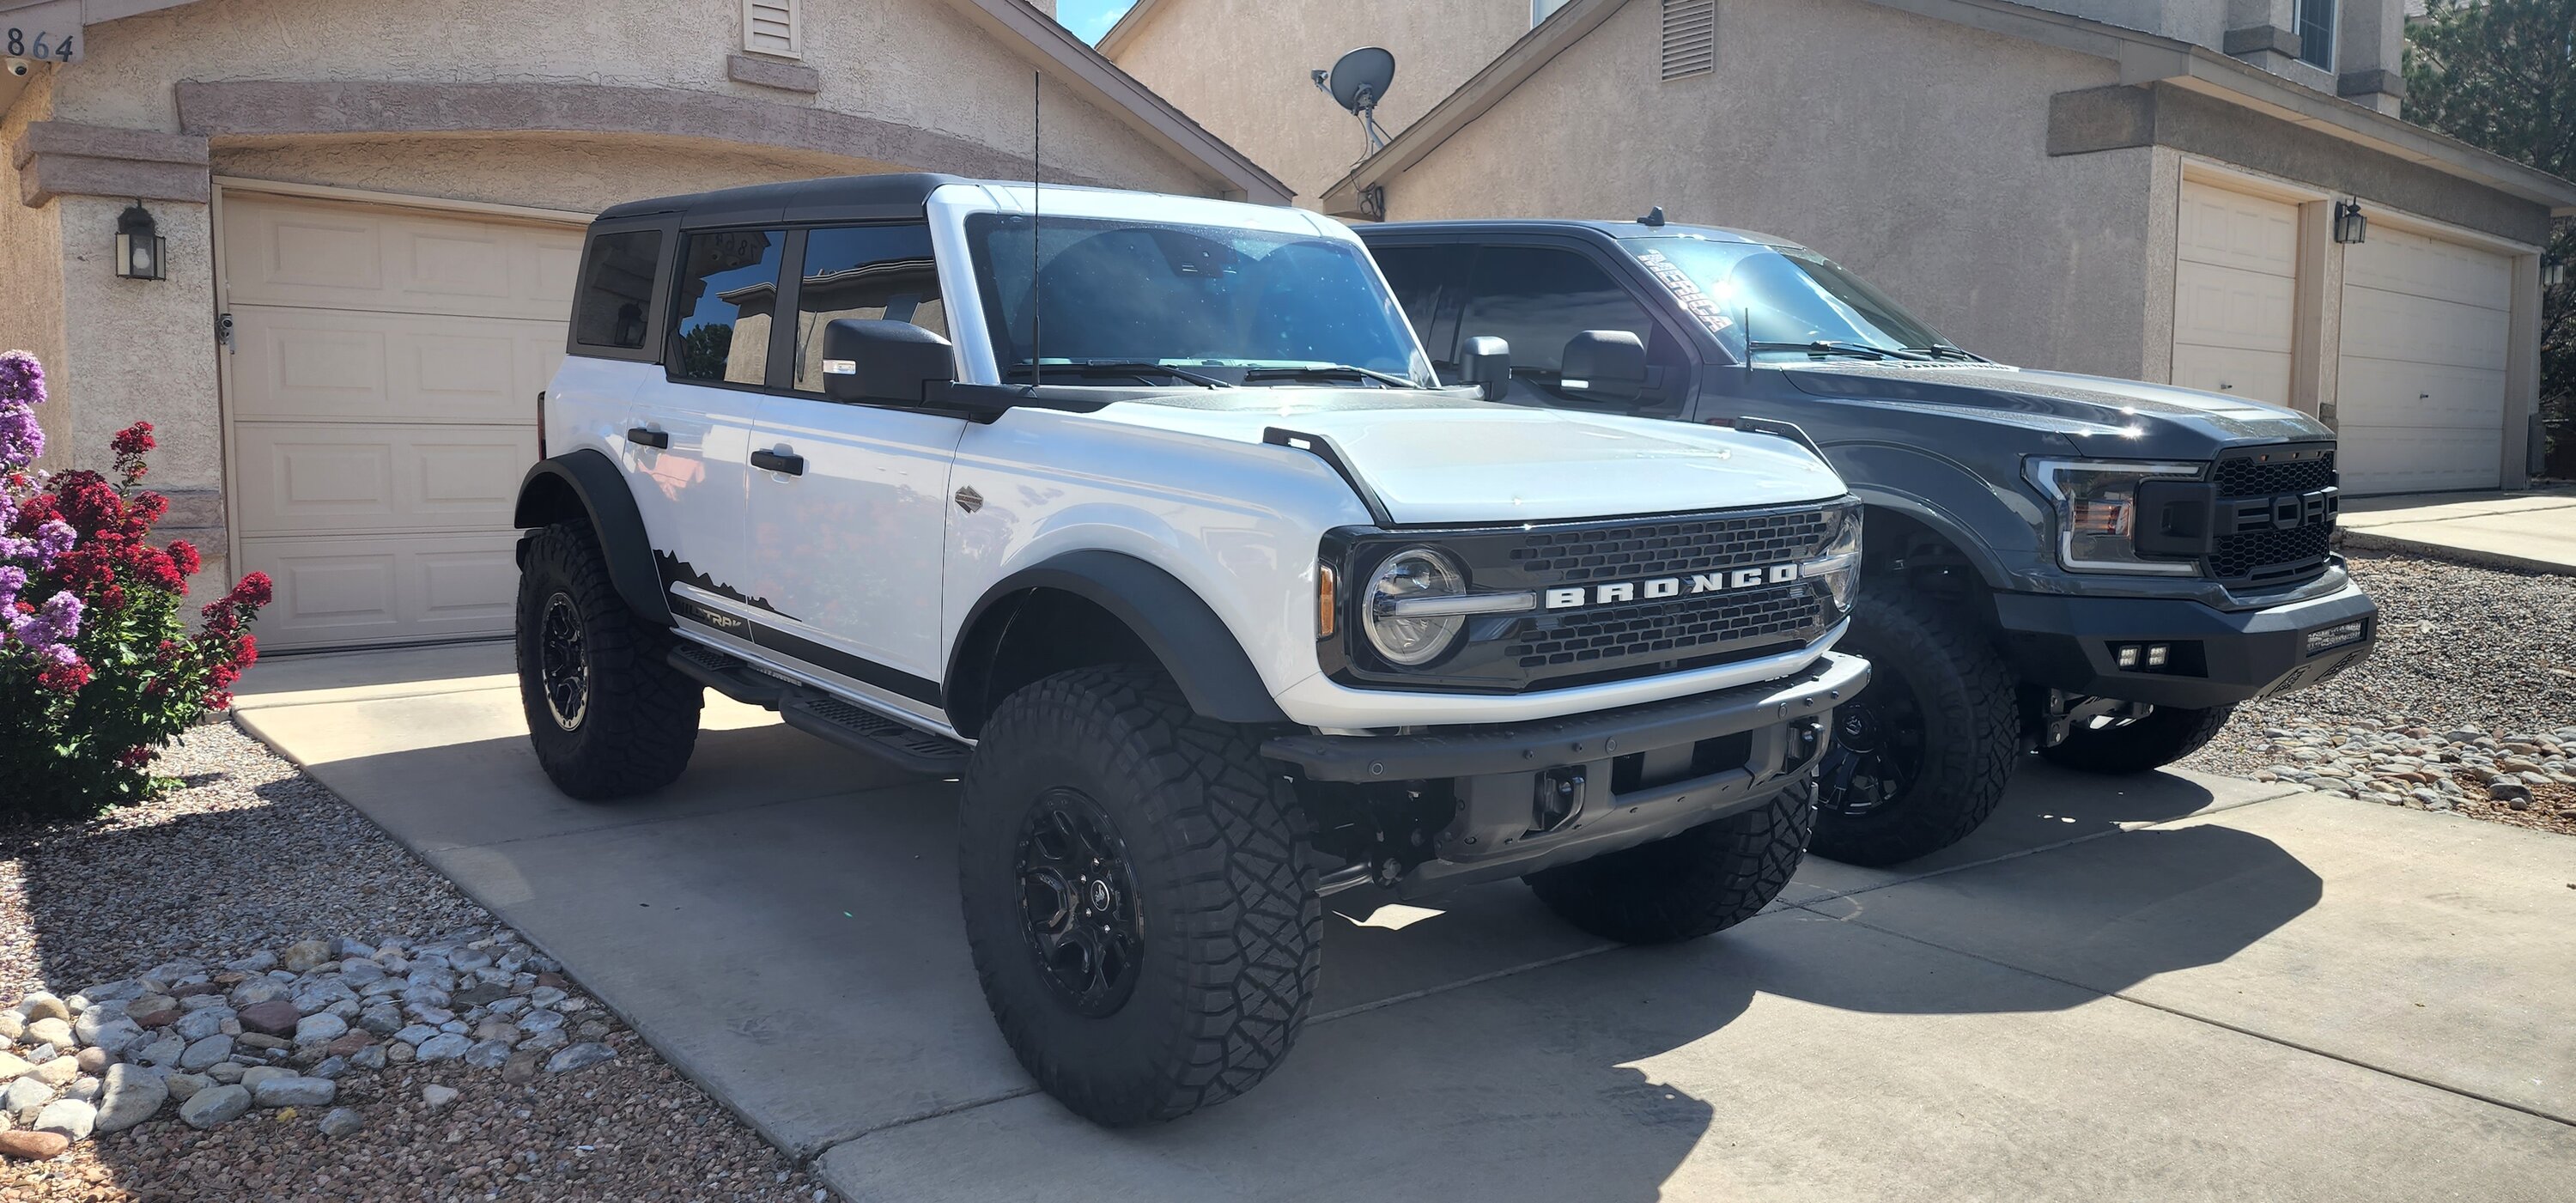 Ford Bronco To trade, keep, or have both? 20220716_161333